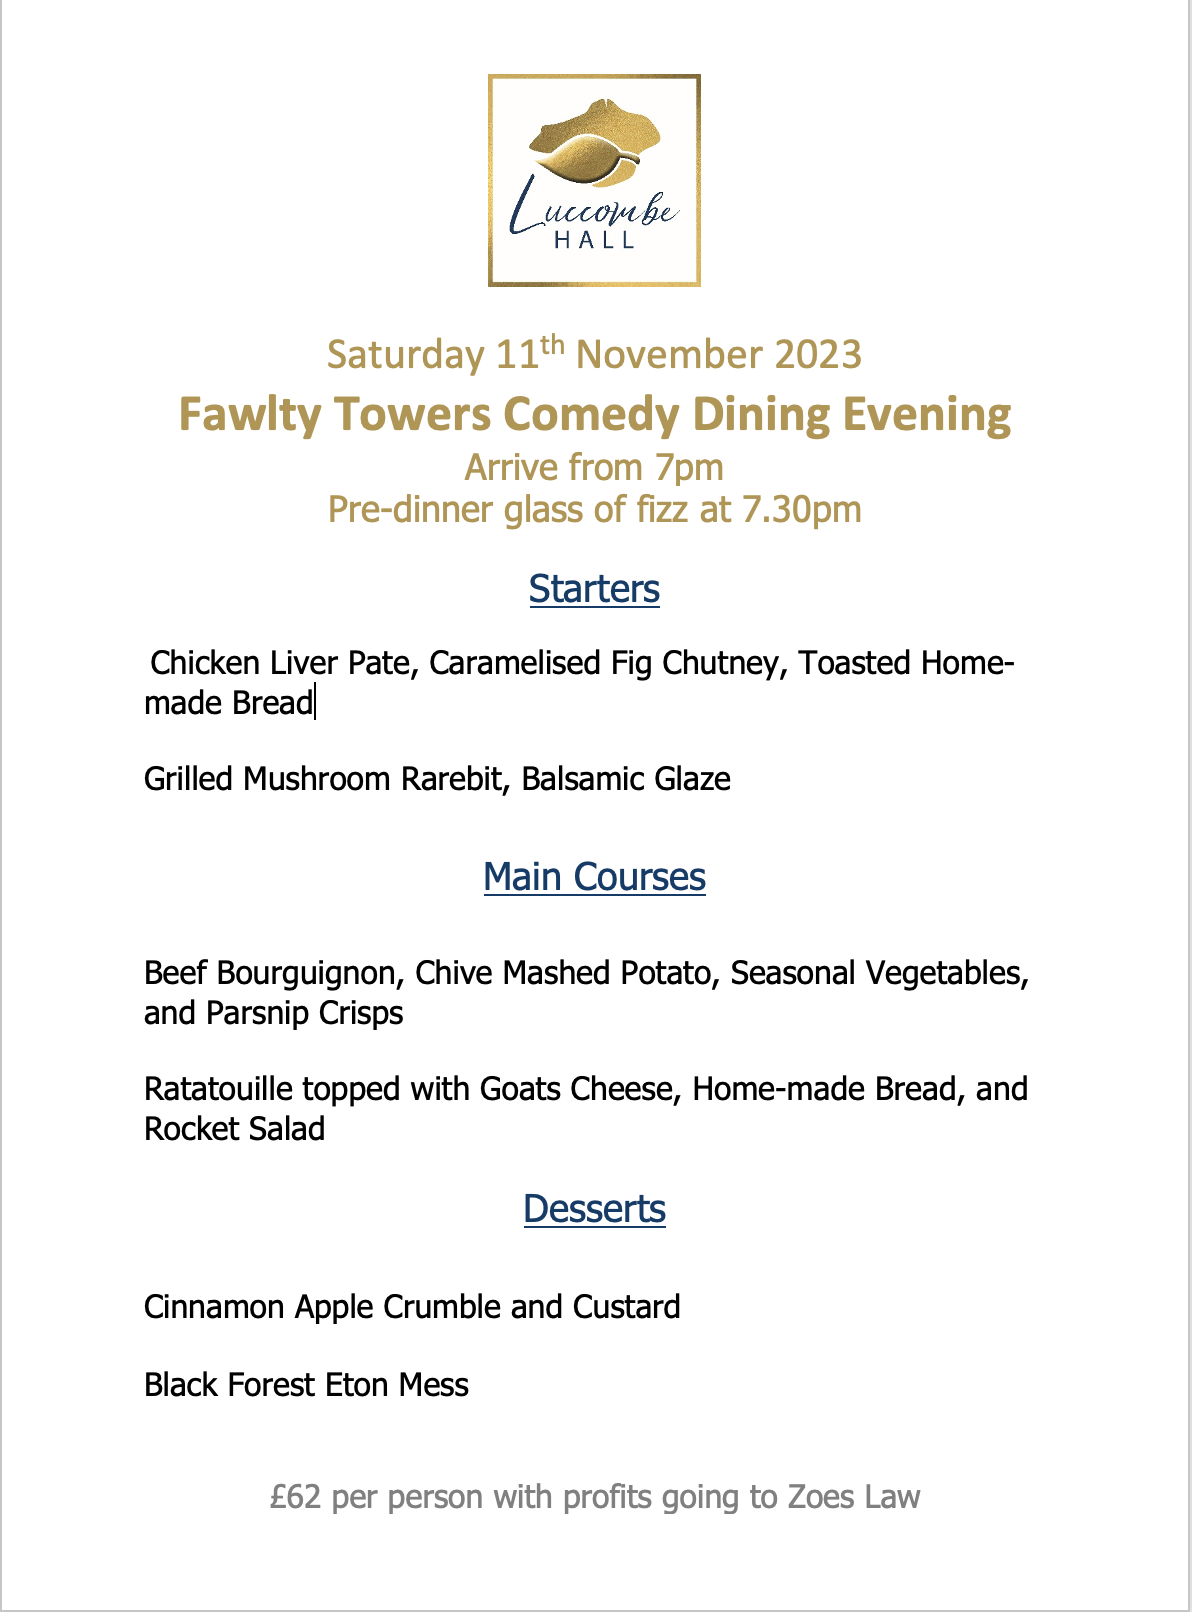 Fawtly Towers Comedy Dinikng, Dinner Menu, Luccombe Hall Hotel, Isle of Wight